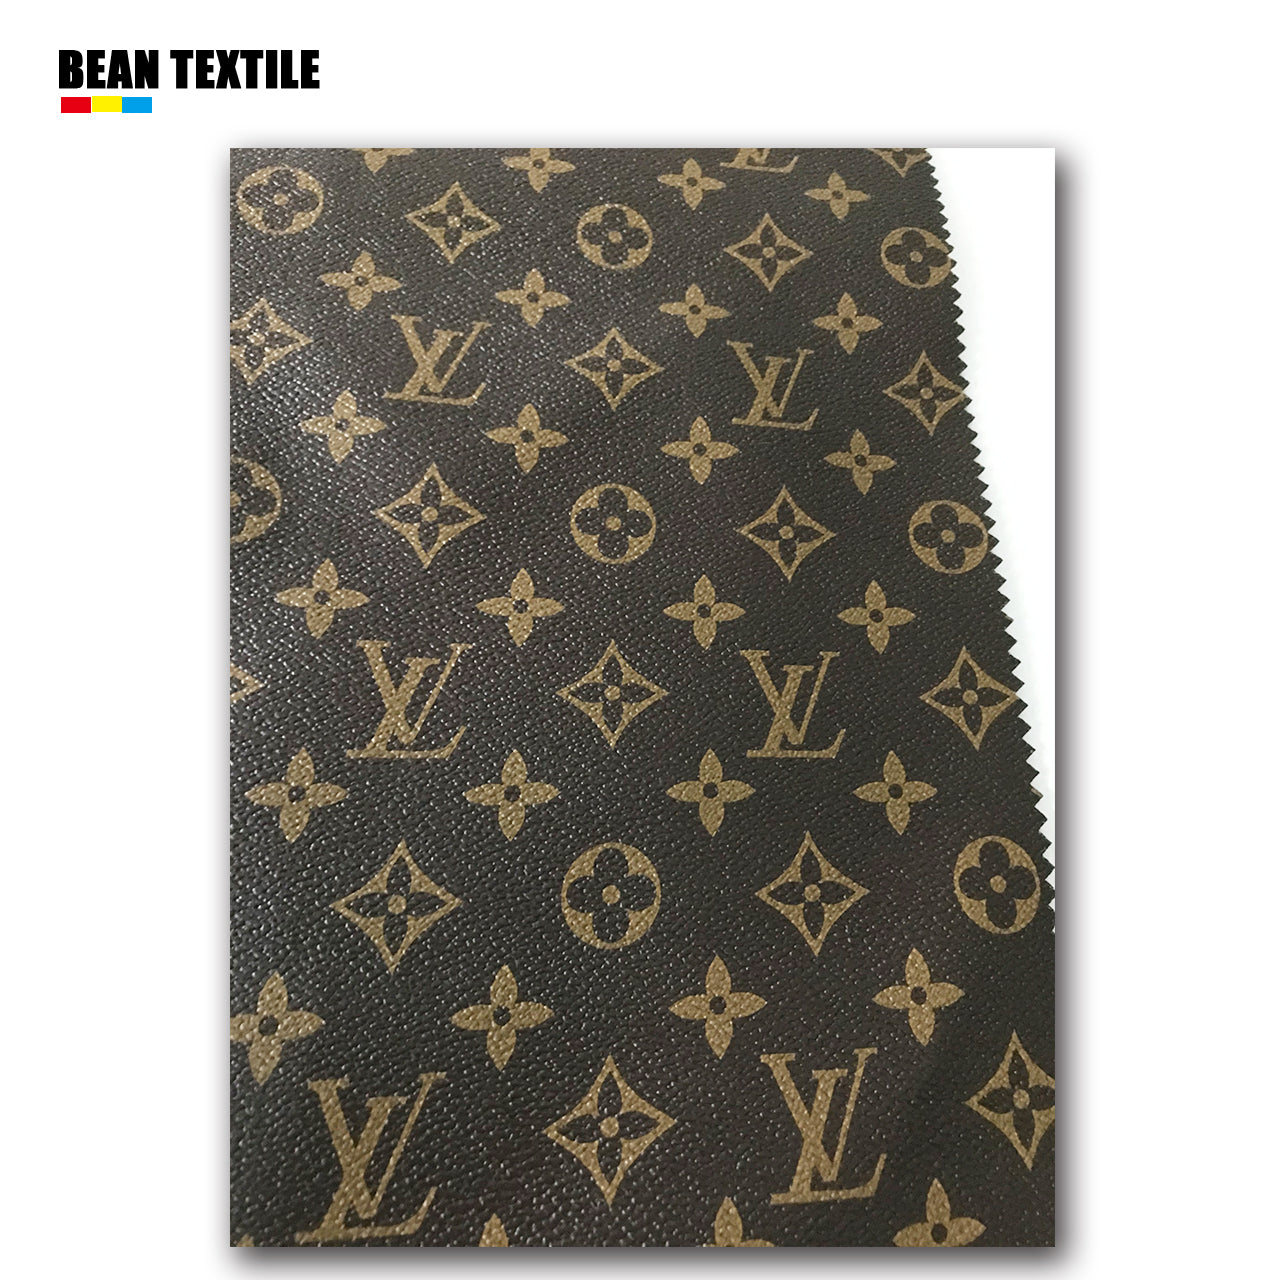 Classic LV vinyl crafting leather fabric for bag leather, shoe leather handicrafts